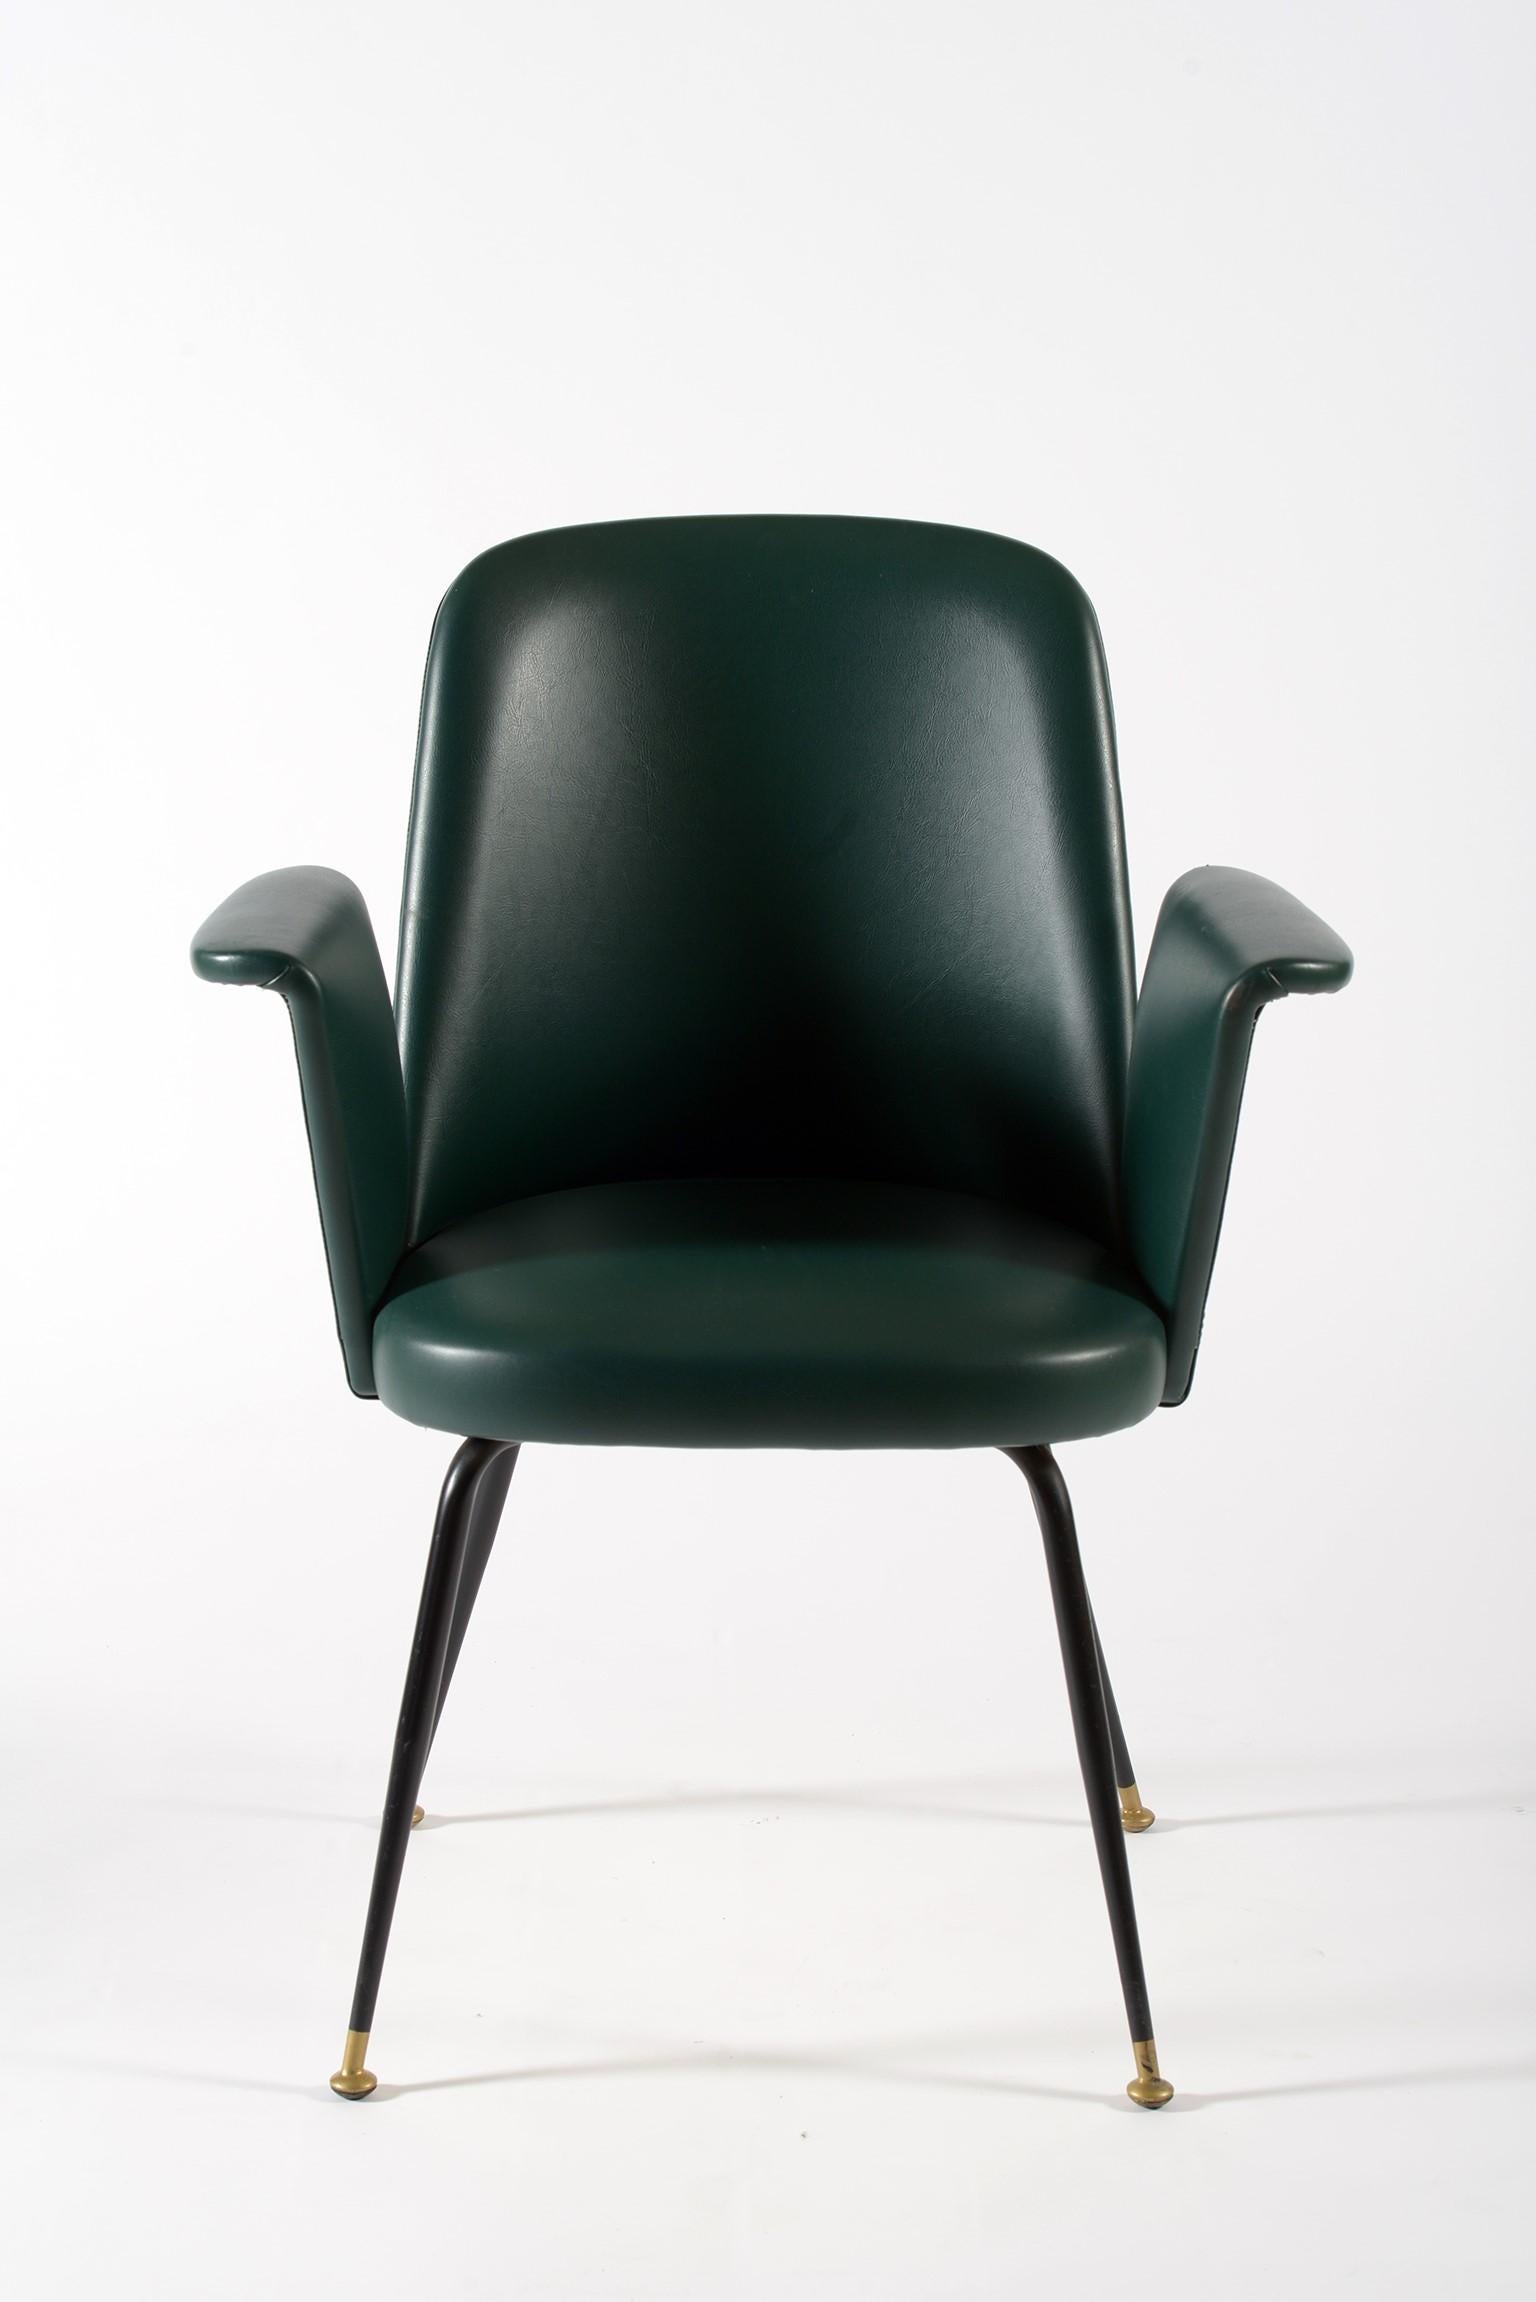 Midcentury Italian Pair of Chairs Brass Leggs Green Original Leatherette, 1950s In Good Condition In Firenze, Toscana